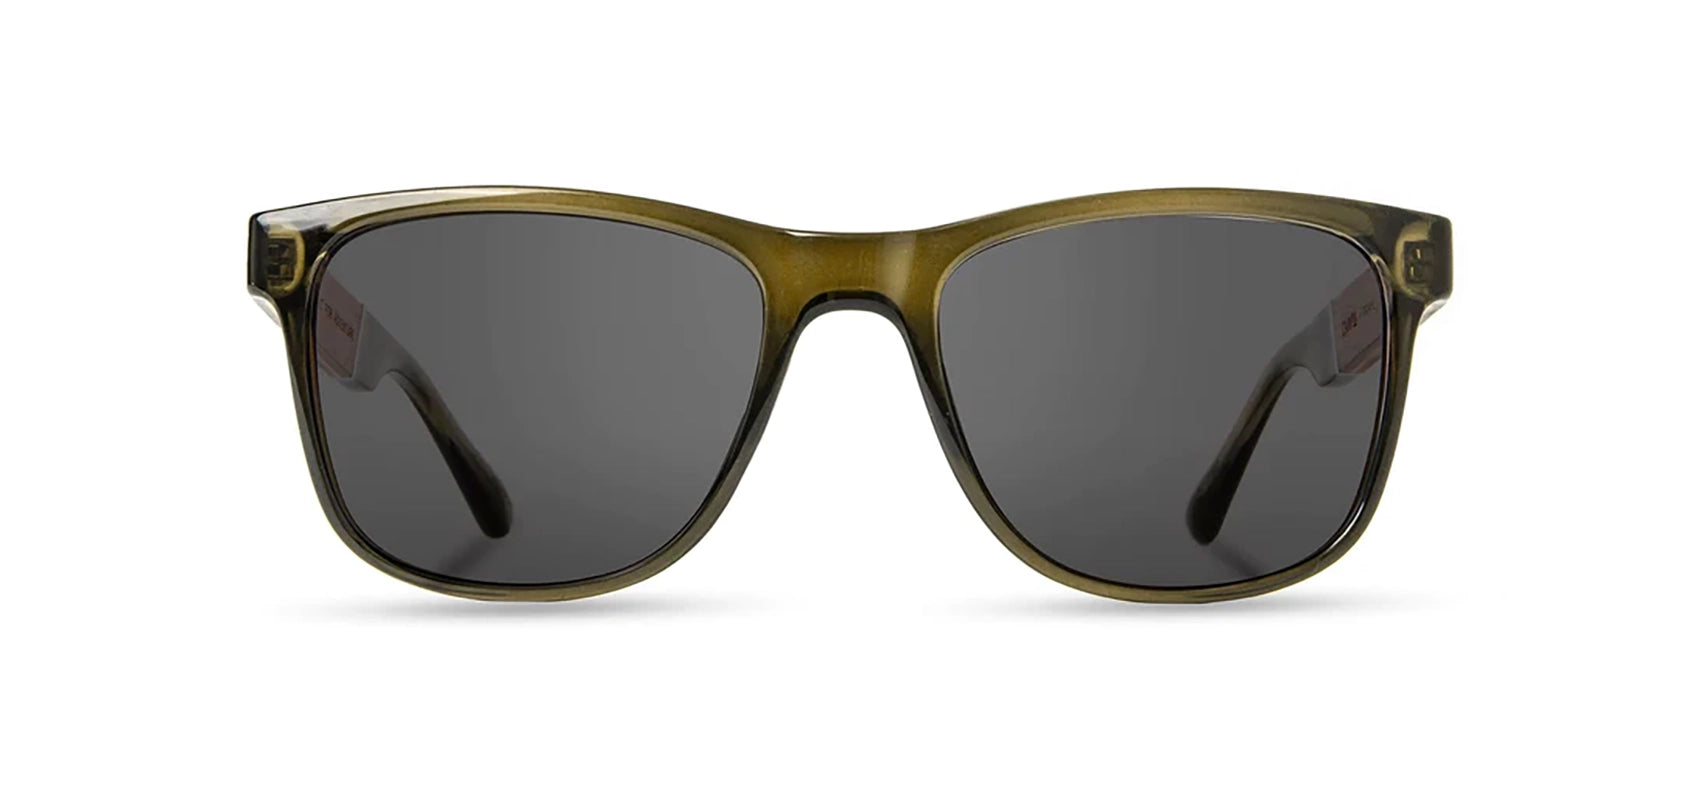 Camp Trail Sunglasses with Moss/Walnut frames and Grey Polarized lenses, front  view